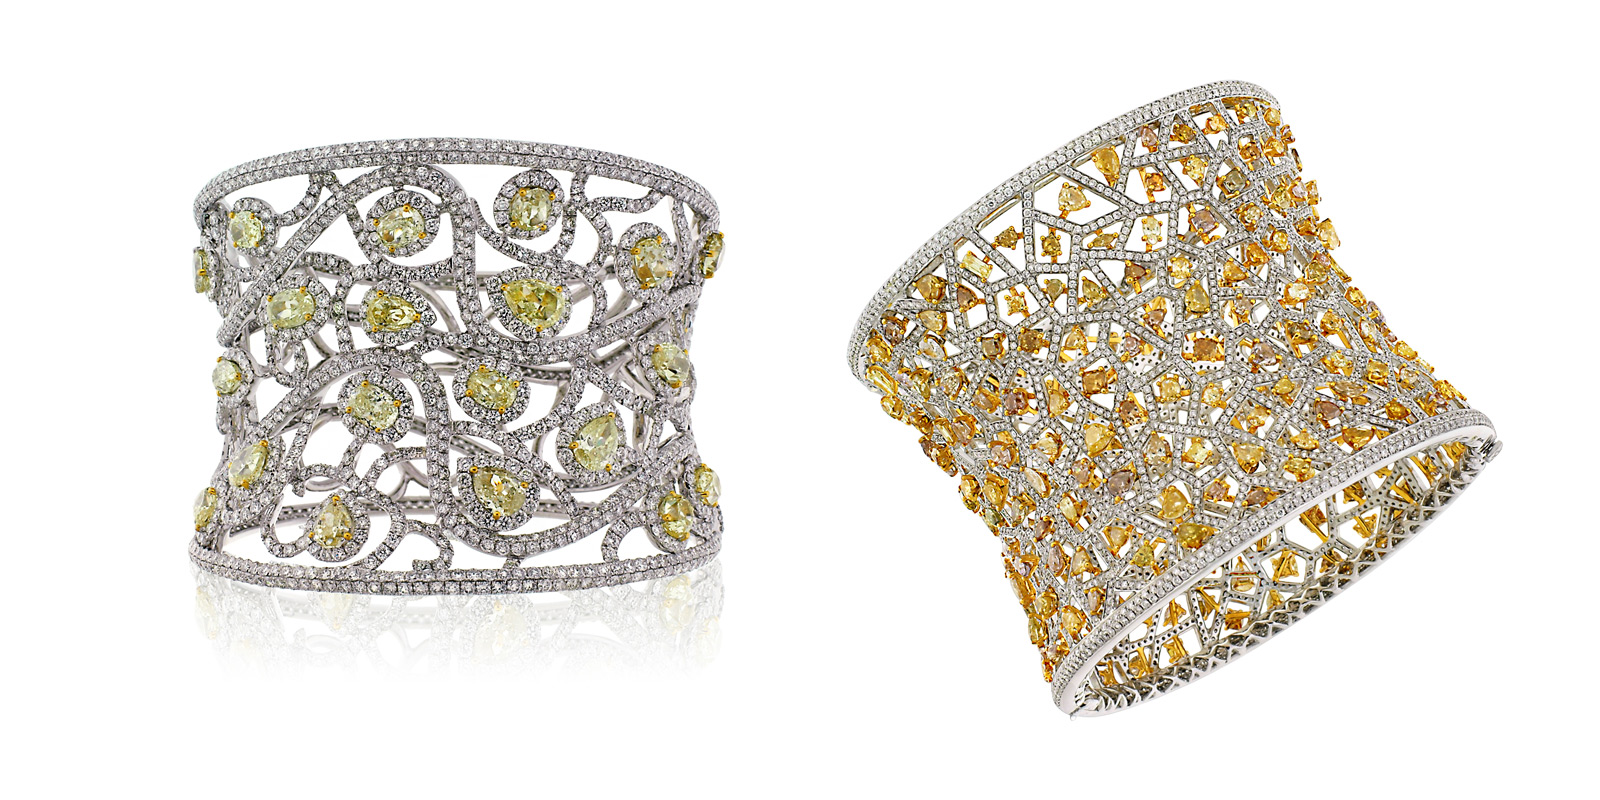 Avakian cuff bracelet in white gold with colourless and yellow diamonds